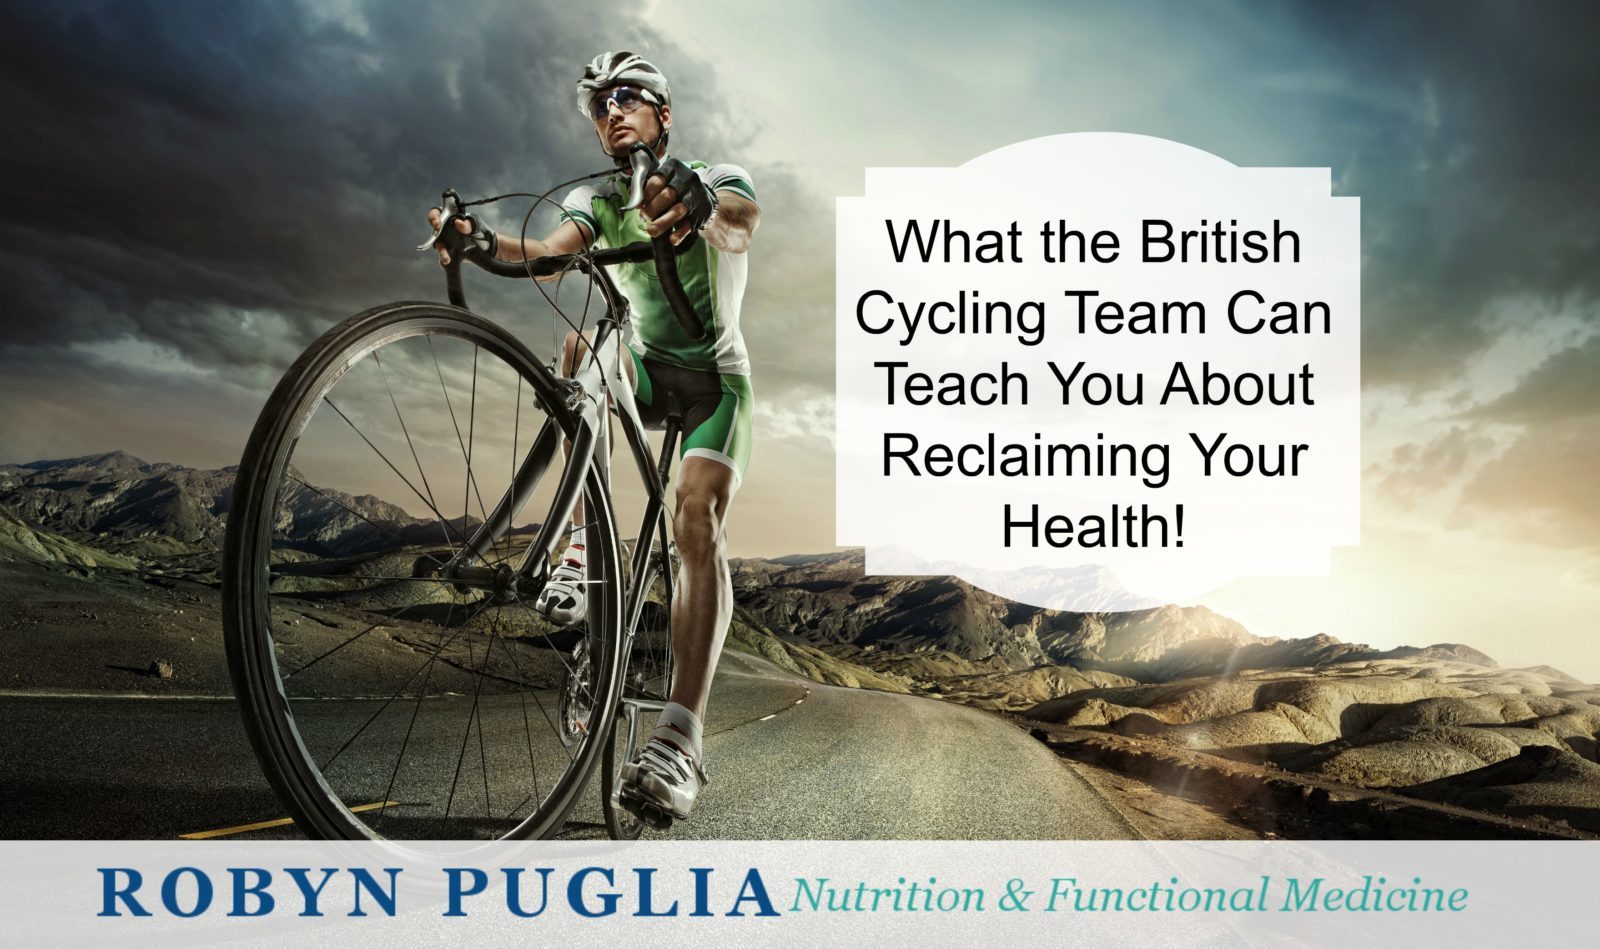 What the British Cycling Team can teach you about reclaiming your health.